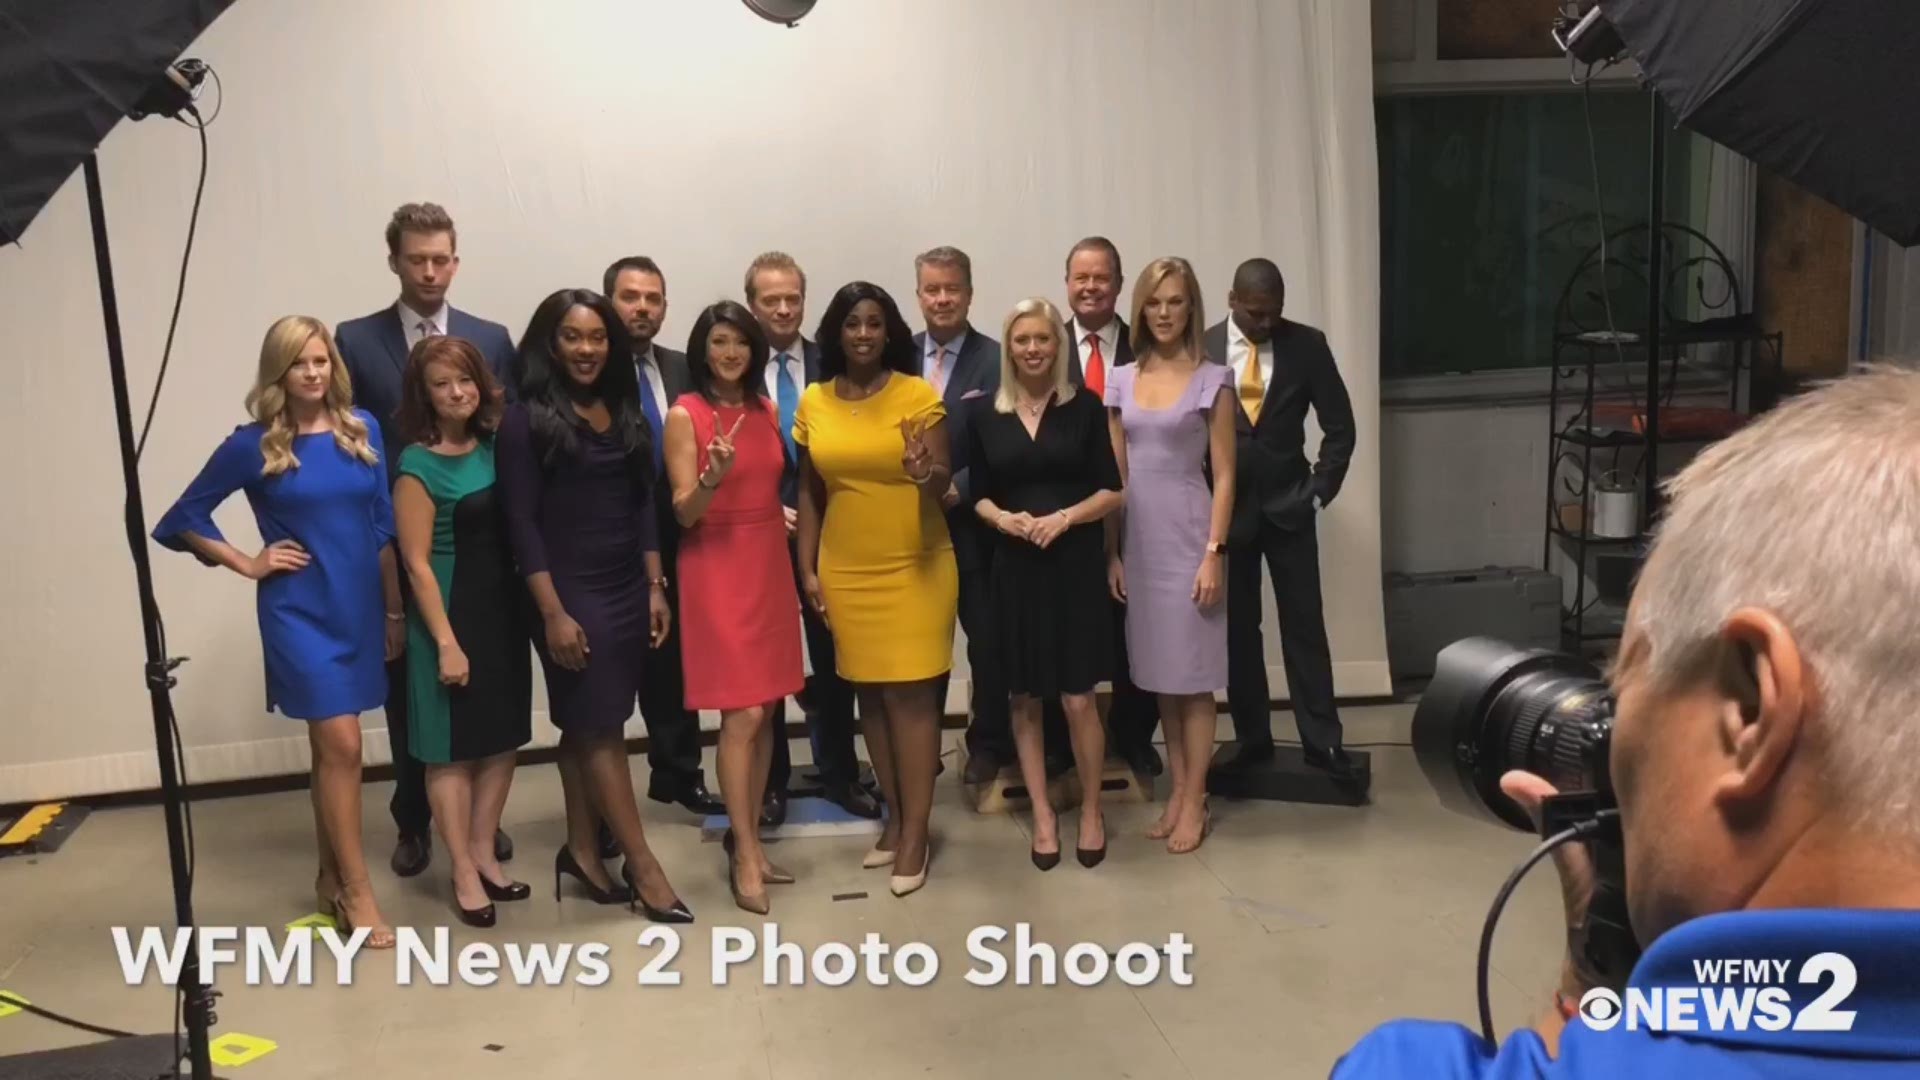 The new fall TV season is almost here. The WFMY News 2 anchors are in fine form now. Here's a behind the scenes look at Monday's staff photo shoot.